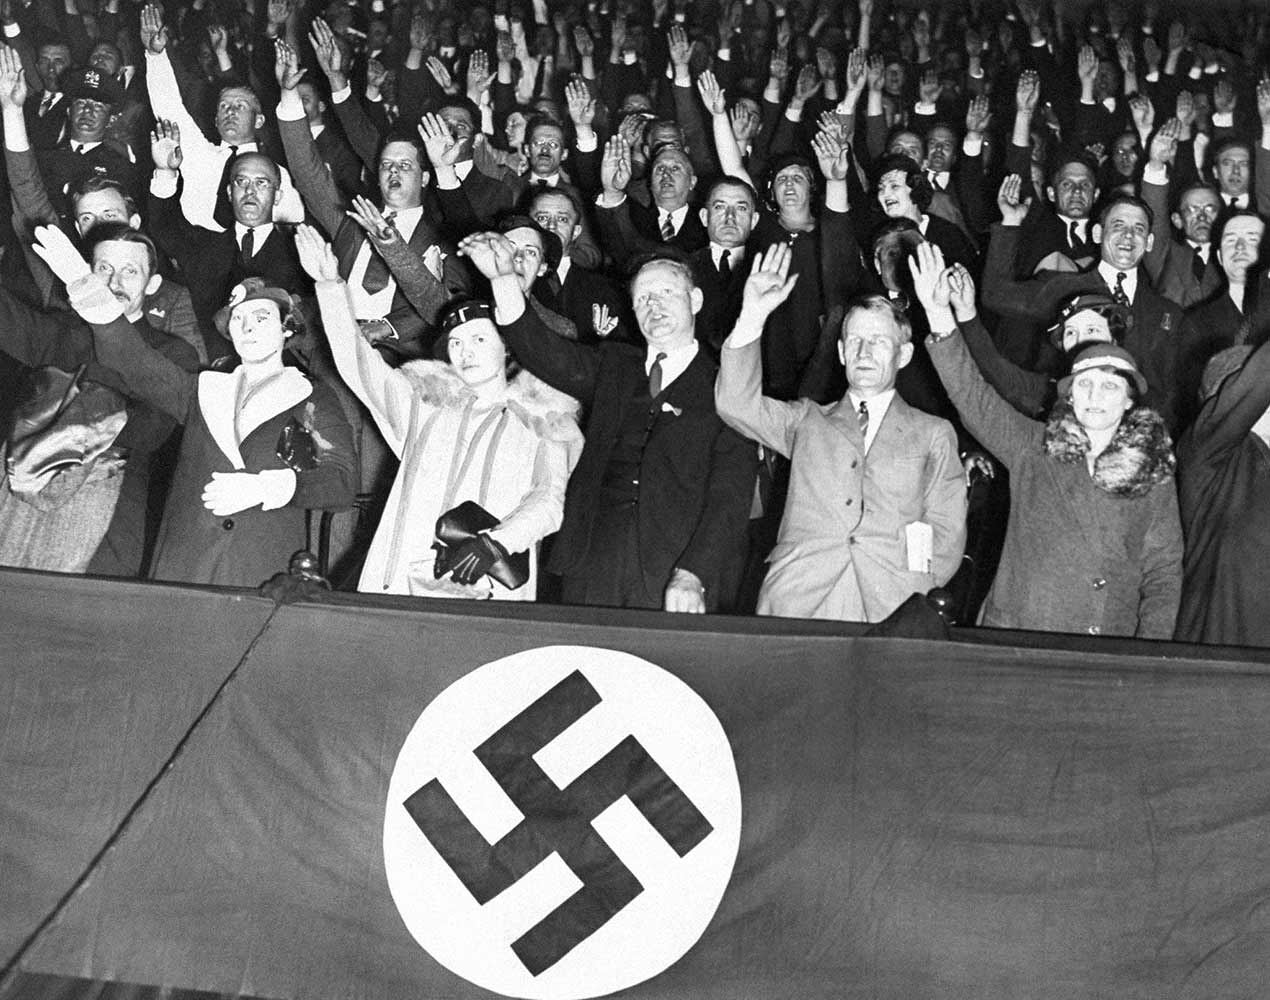 Nazi salute by Friends of New Germany at Madison Square Garden.